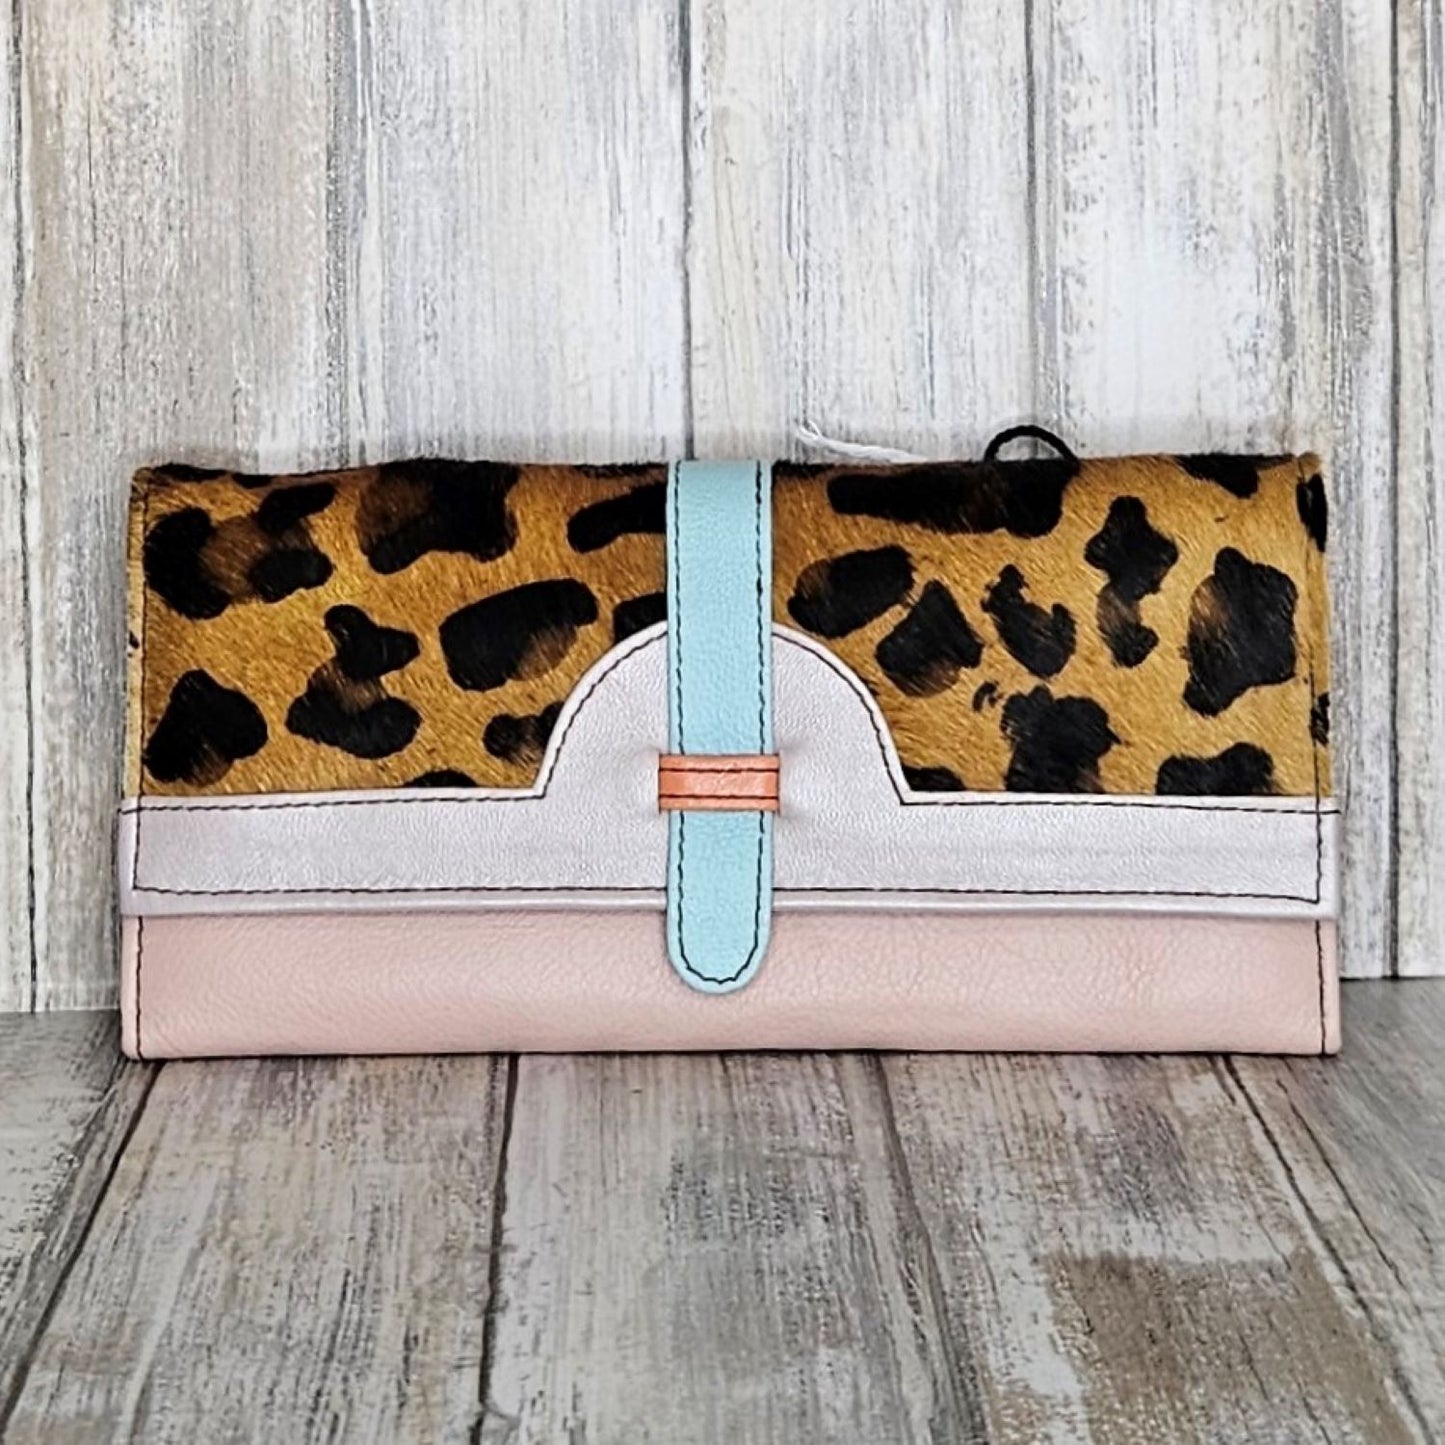 The Soruka Purse-68746-Cheetah/Pink/Orange makes a bold statement with its vibrant colours and upcycled leather. Not only eco-friendly, this purse is also fair trade, ensuring ethical production methods. With plenty of card slots and a coin section, this colourful and soft leather purse is perfect for day-to-day use! Carrying your everyday essentials has never looked so good.  Each Soruka bag and purse comes to you in a beautiful recycled Sari gift bag.  L:20.5cm W:2.5cm H:10cm